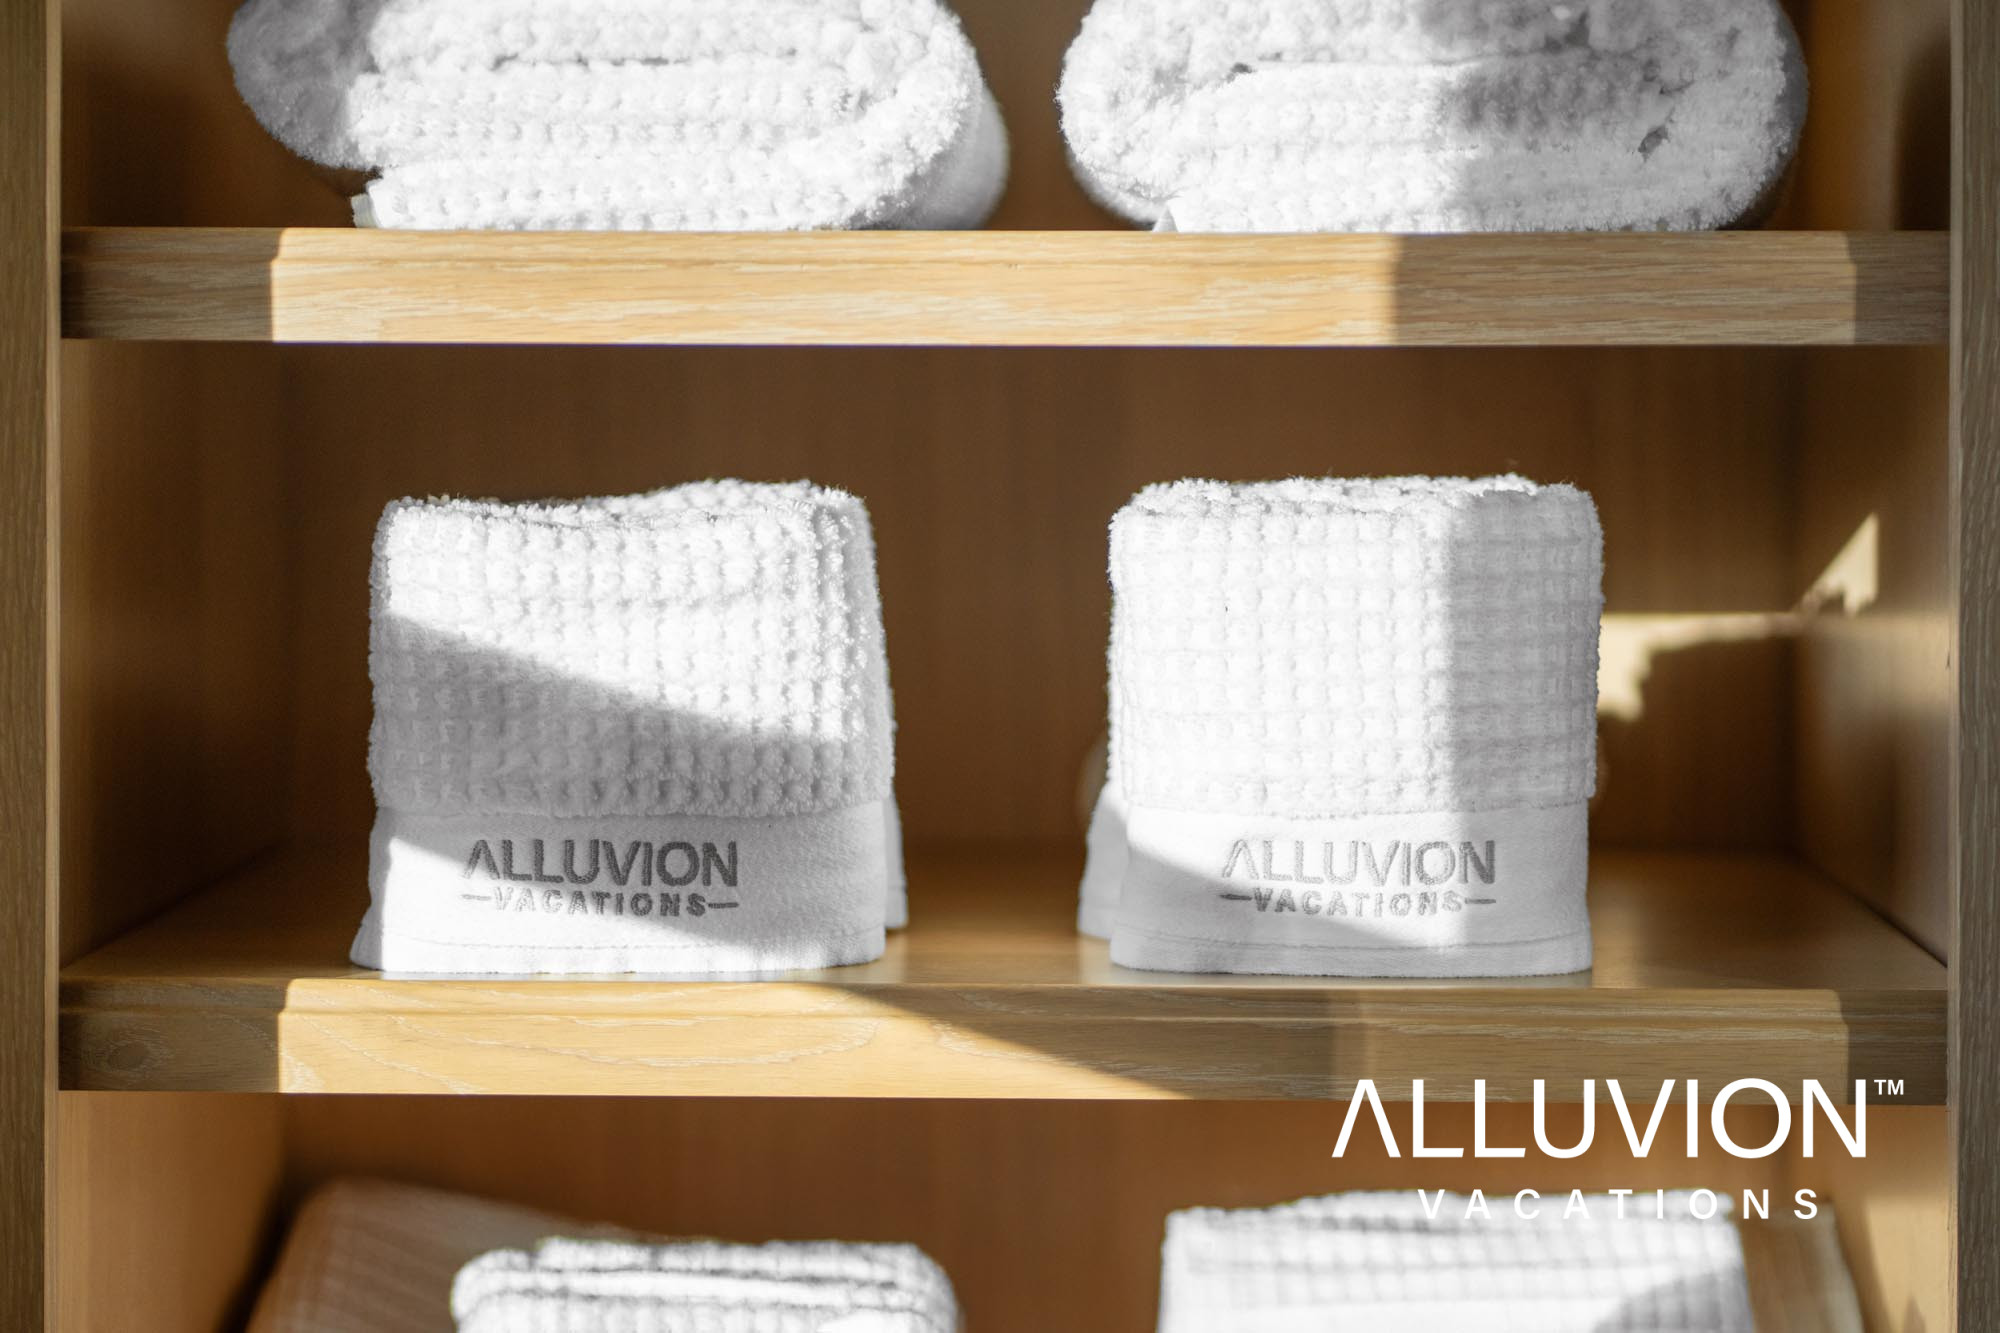 Alluvion Vacations: Embracing the Meaning Economy with Our Digital Detox, Aromatherapy, and Sustainability Initiatives